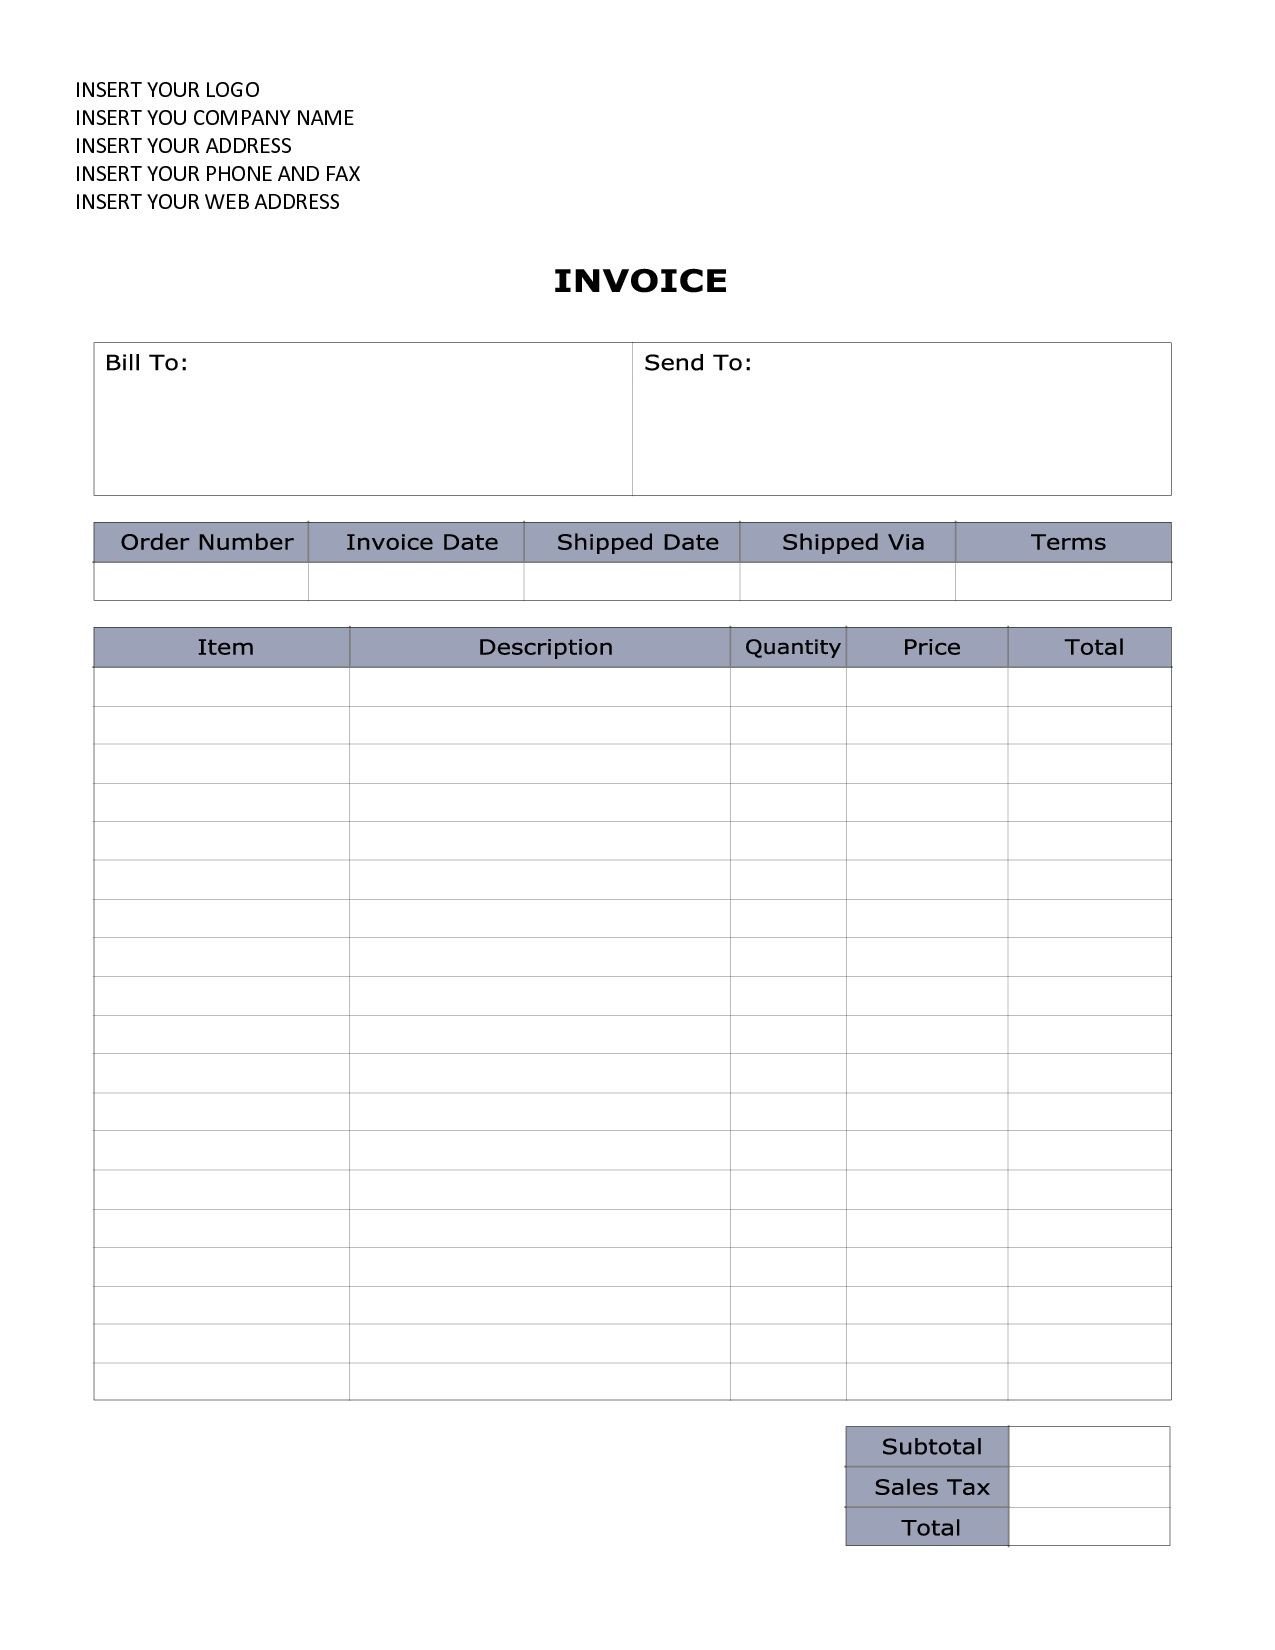 Invoice Template for Word Word Document Invoice Template Sales Invoice Sample Word